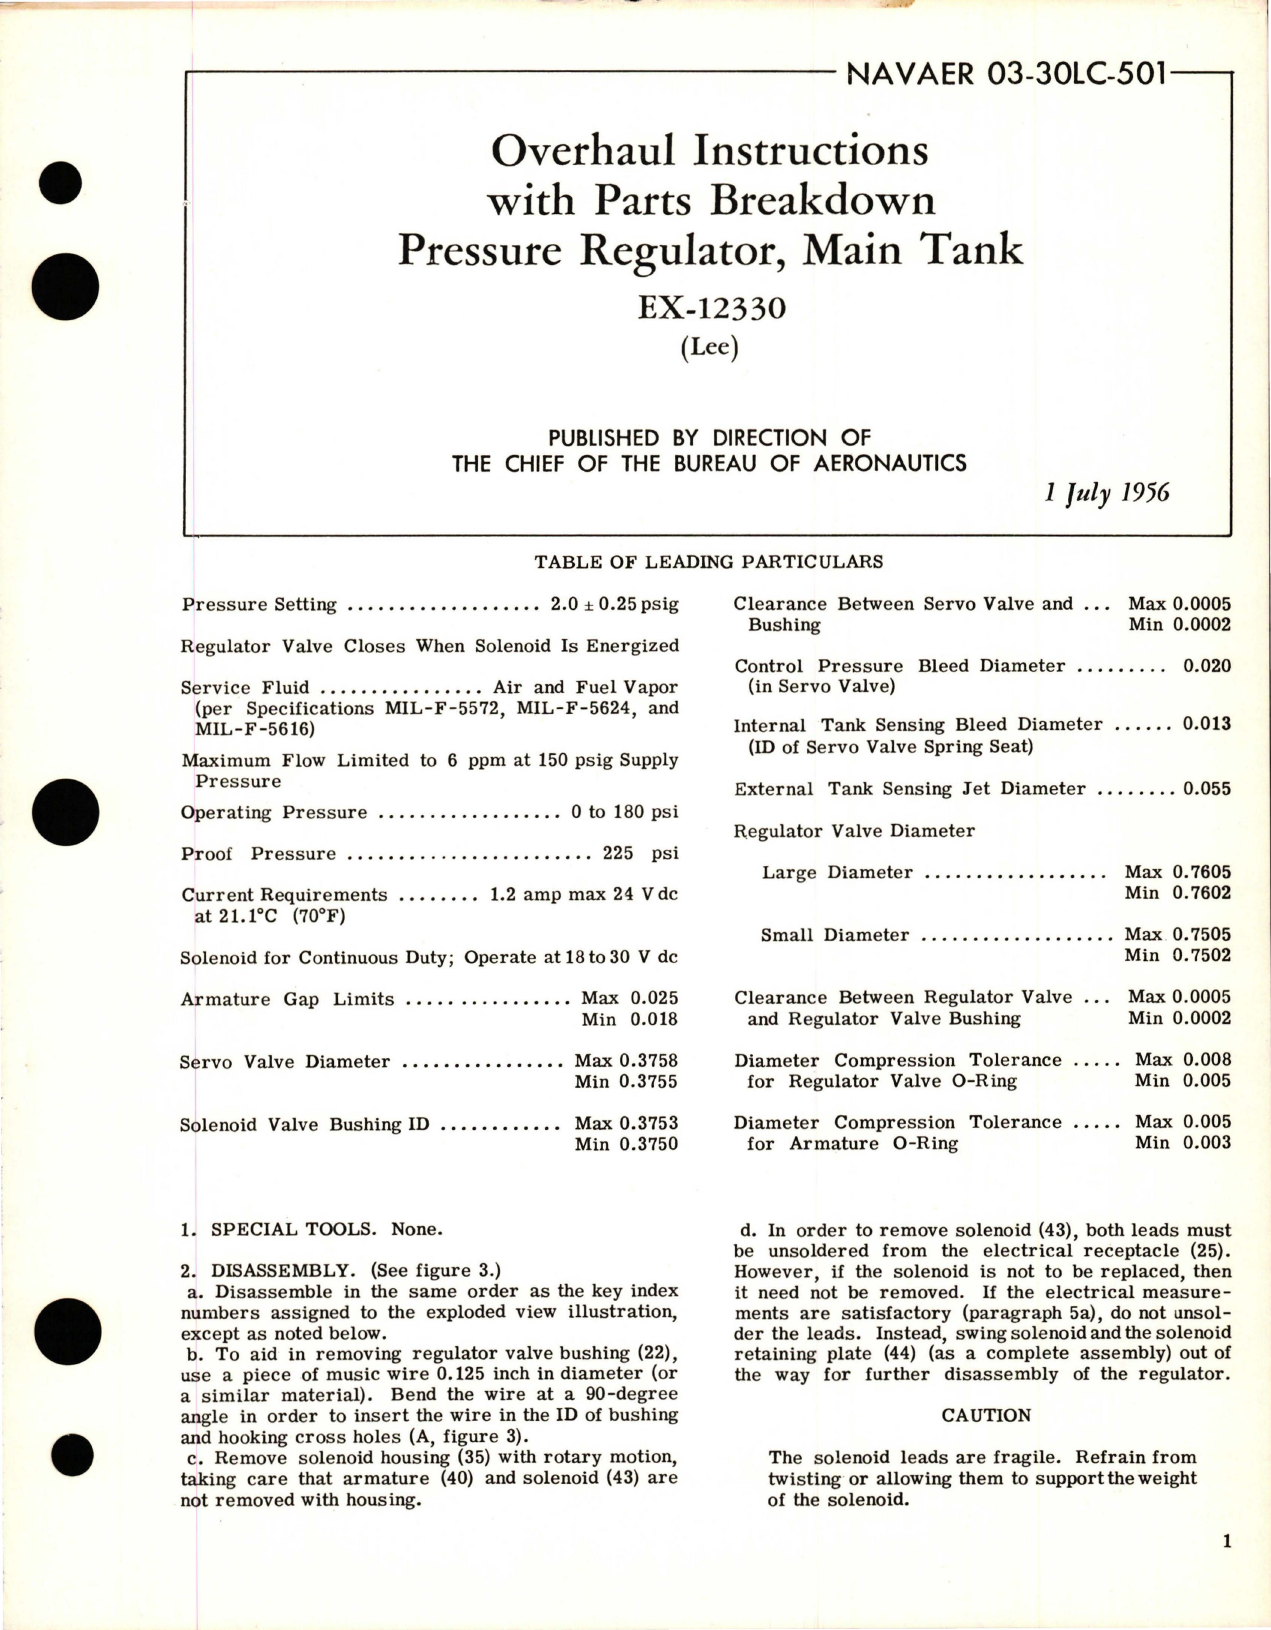 Sample page 1 from AirCorps Library document: Overhaul Instructions with Parts Breakdown for Main Tank Pressure Regulator - EX-12330